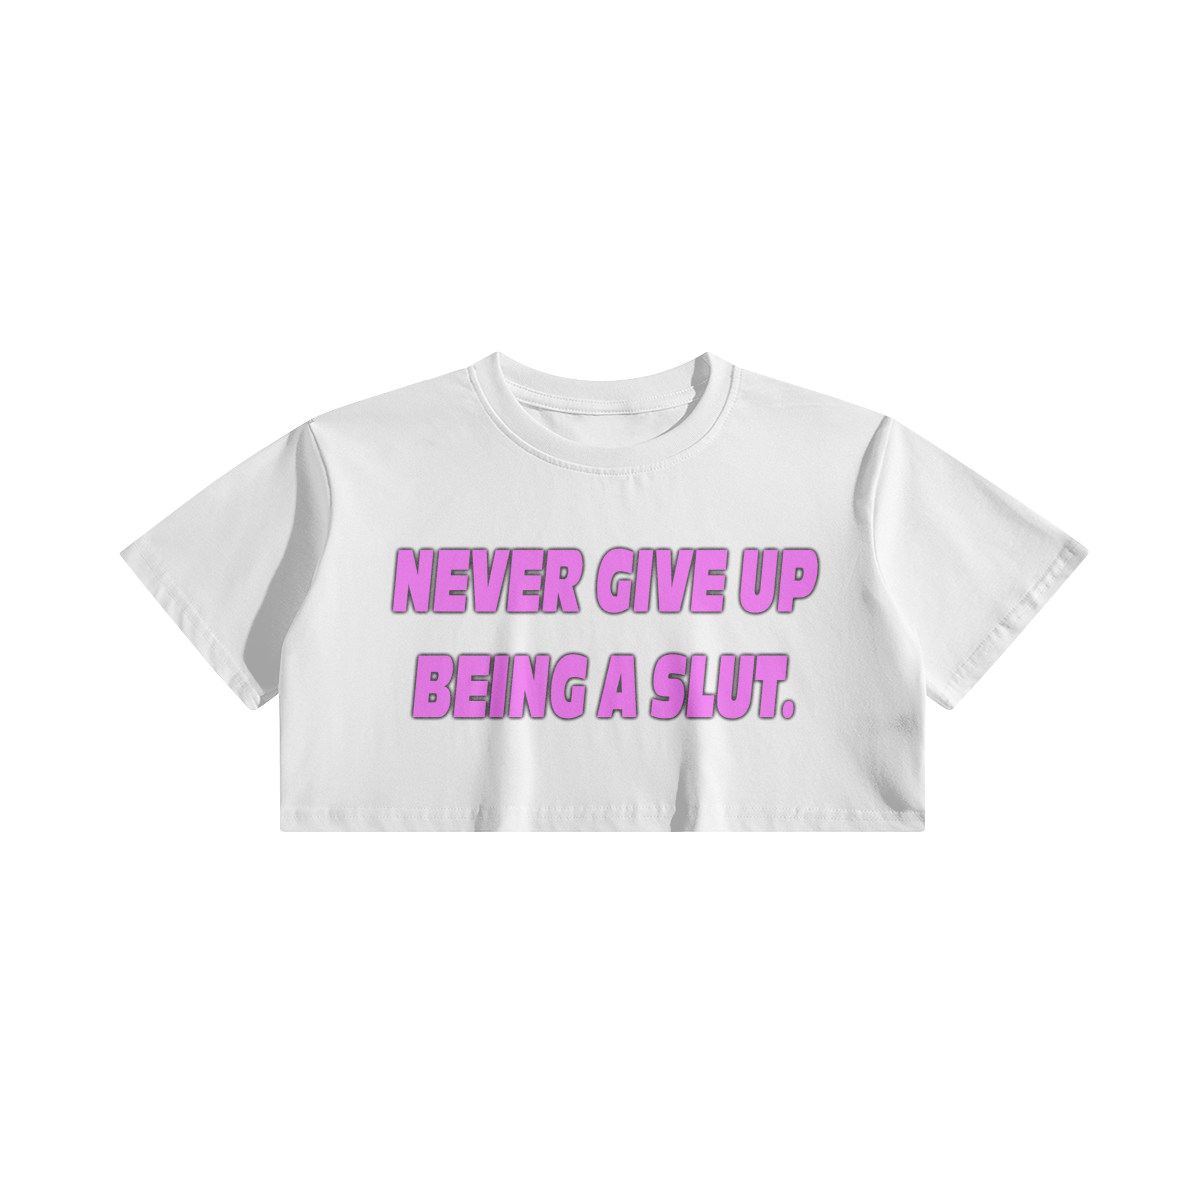 Never Give Up Being a Slut crop top